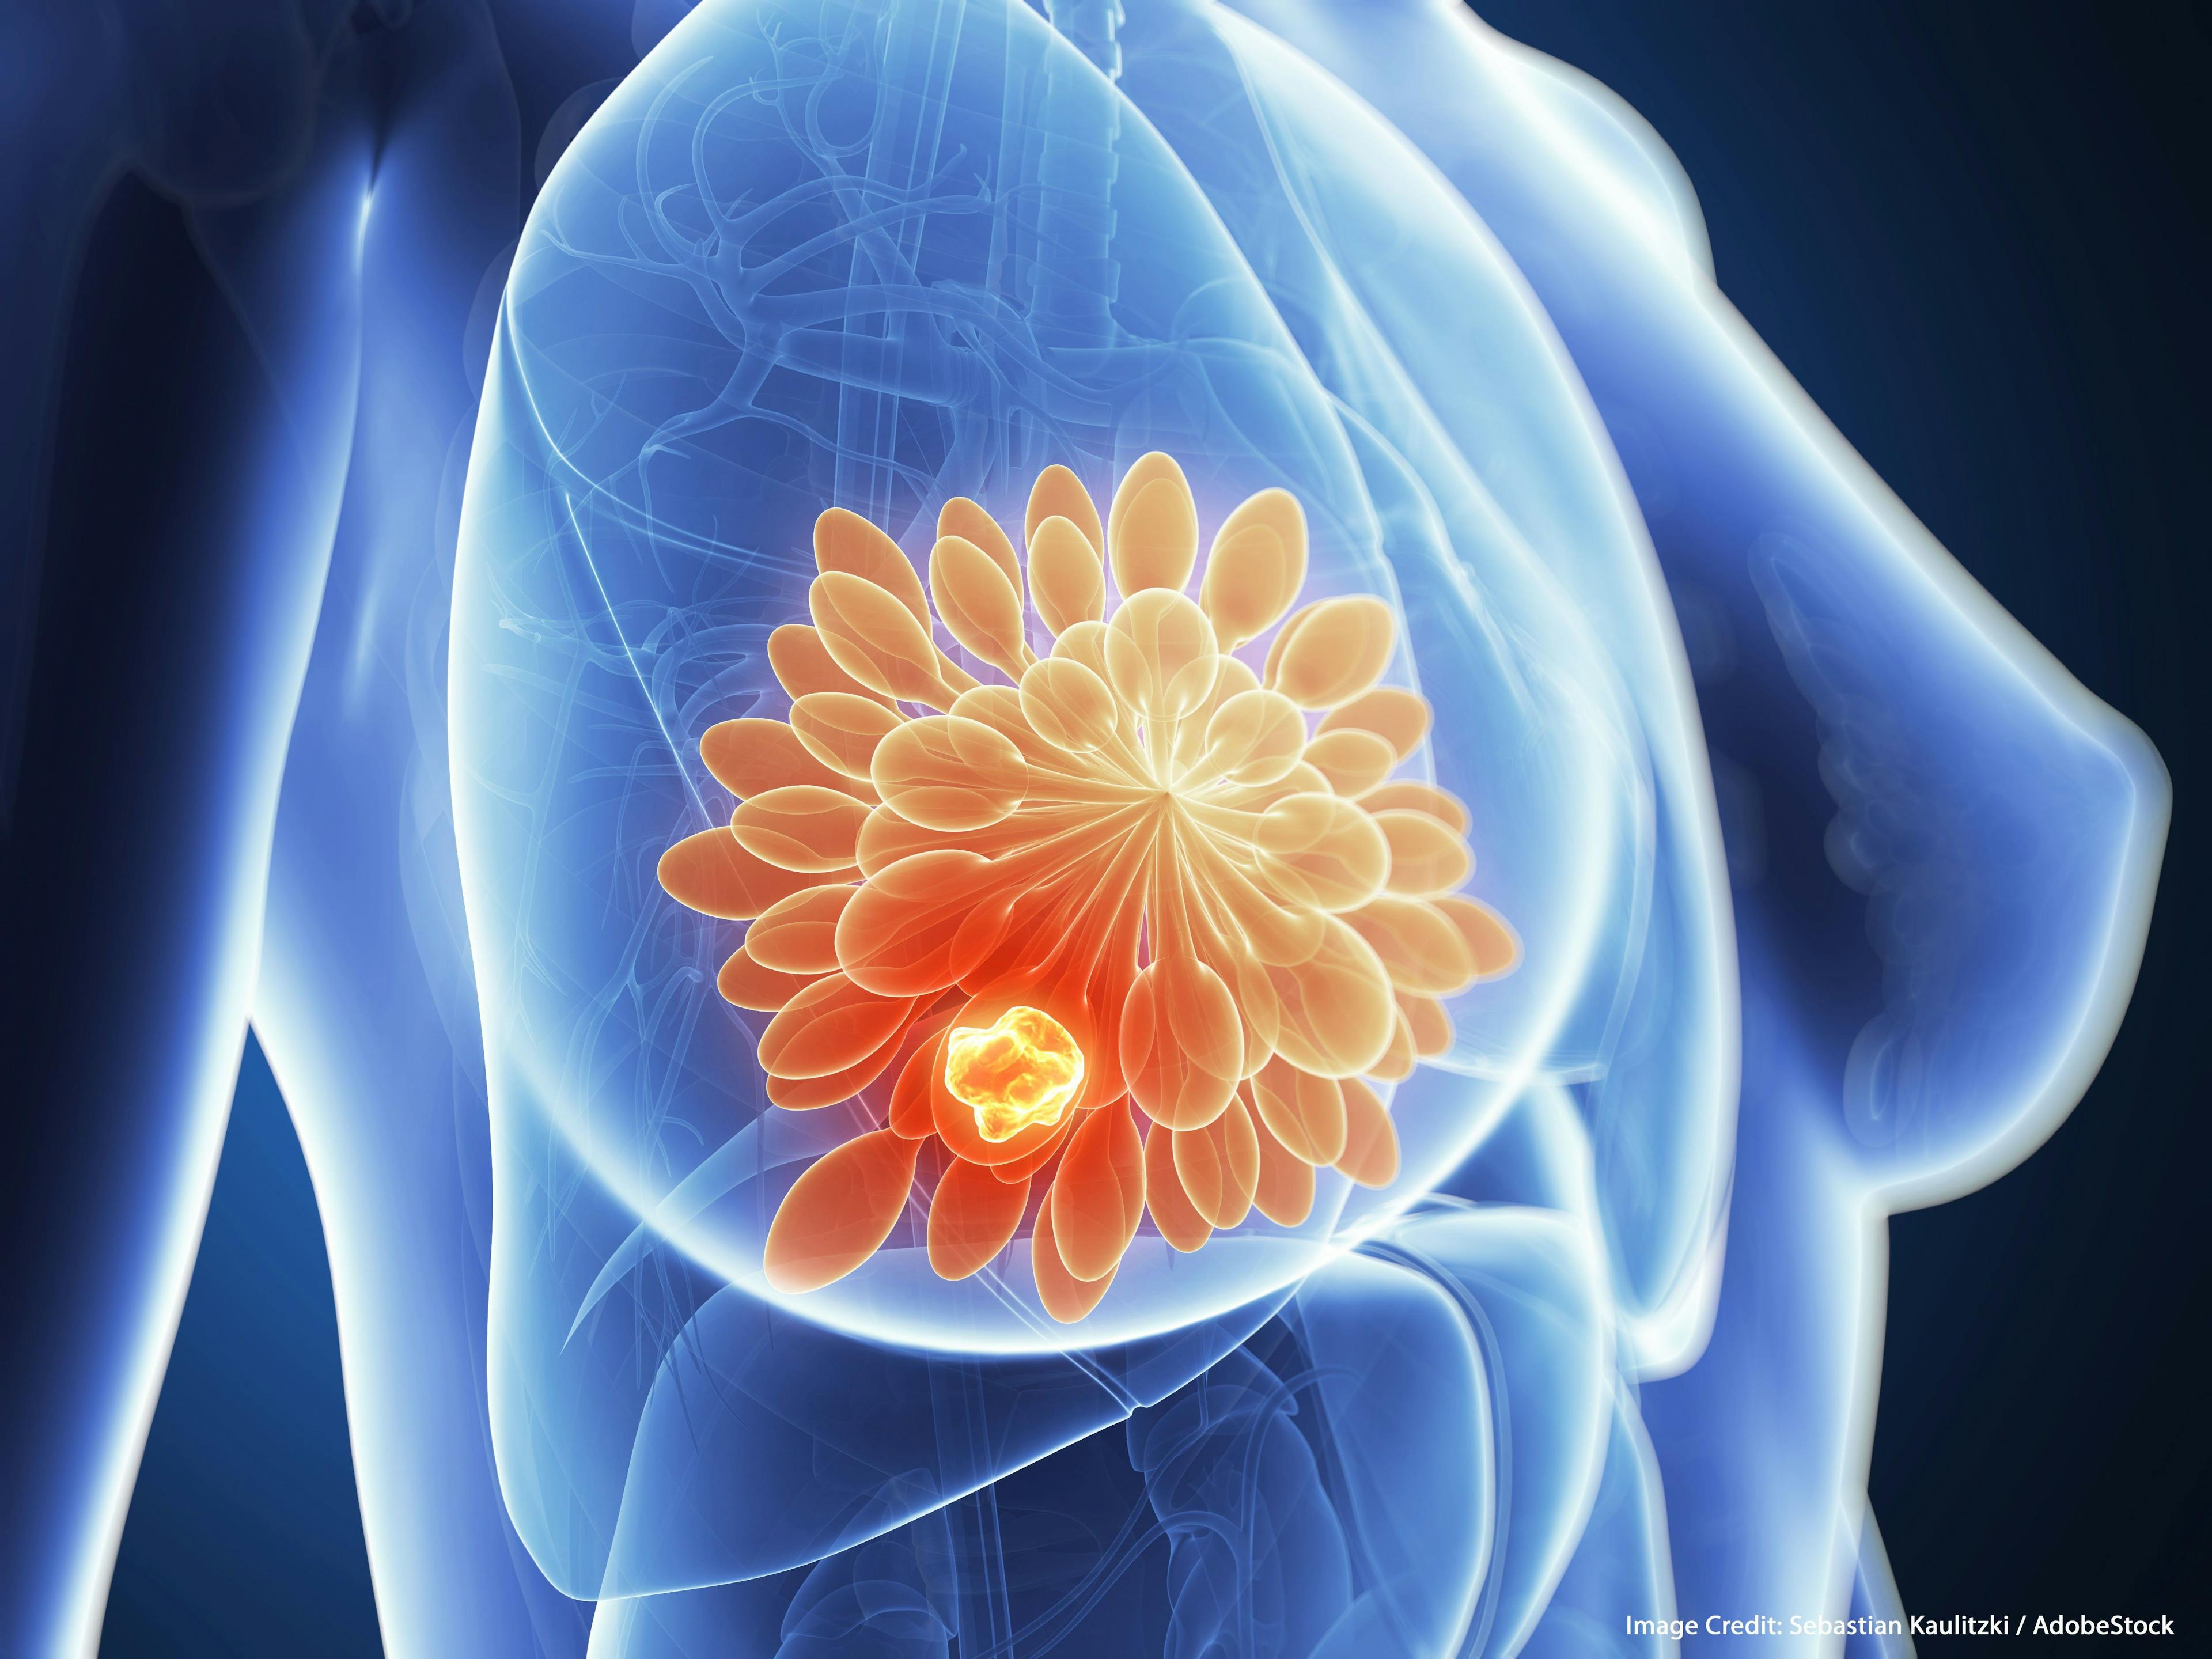 NCCN: Updated Guidelines Reflect Advances, ‘Immunotherapy Era’ for Breast Cancer